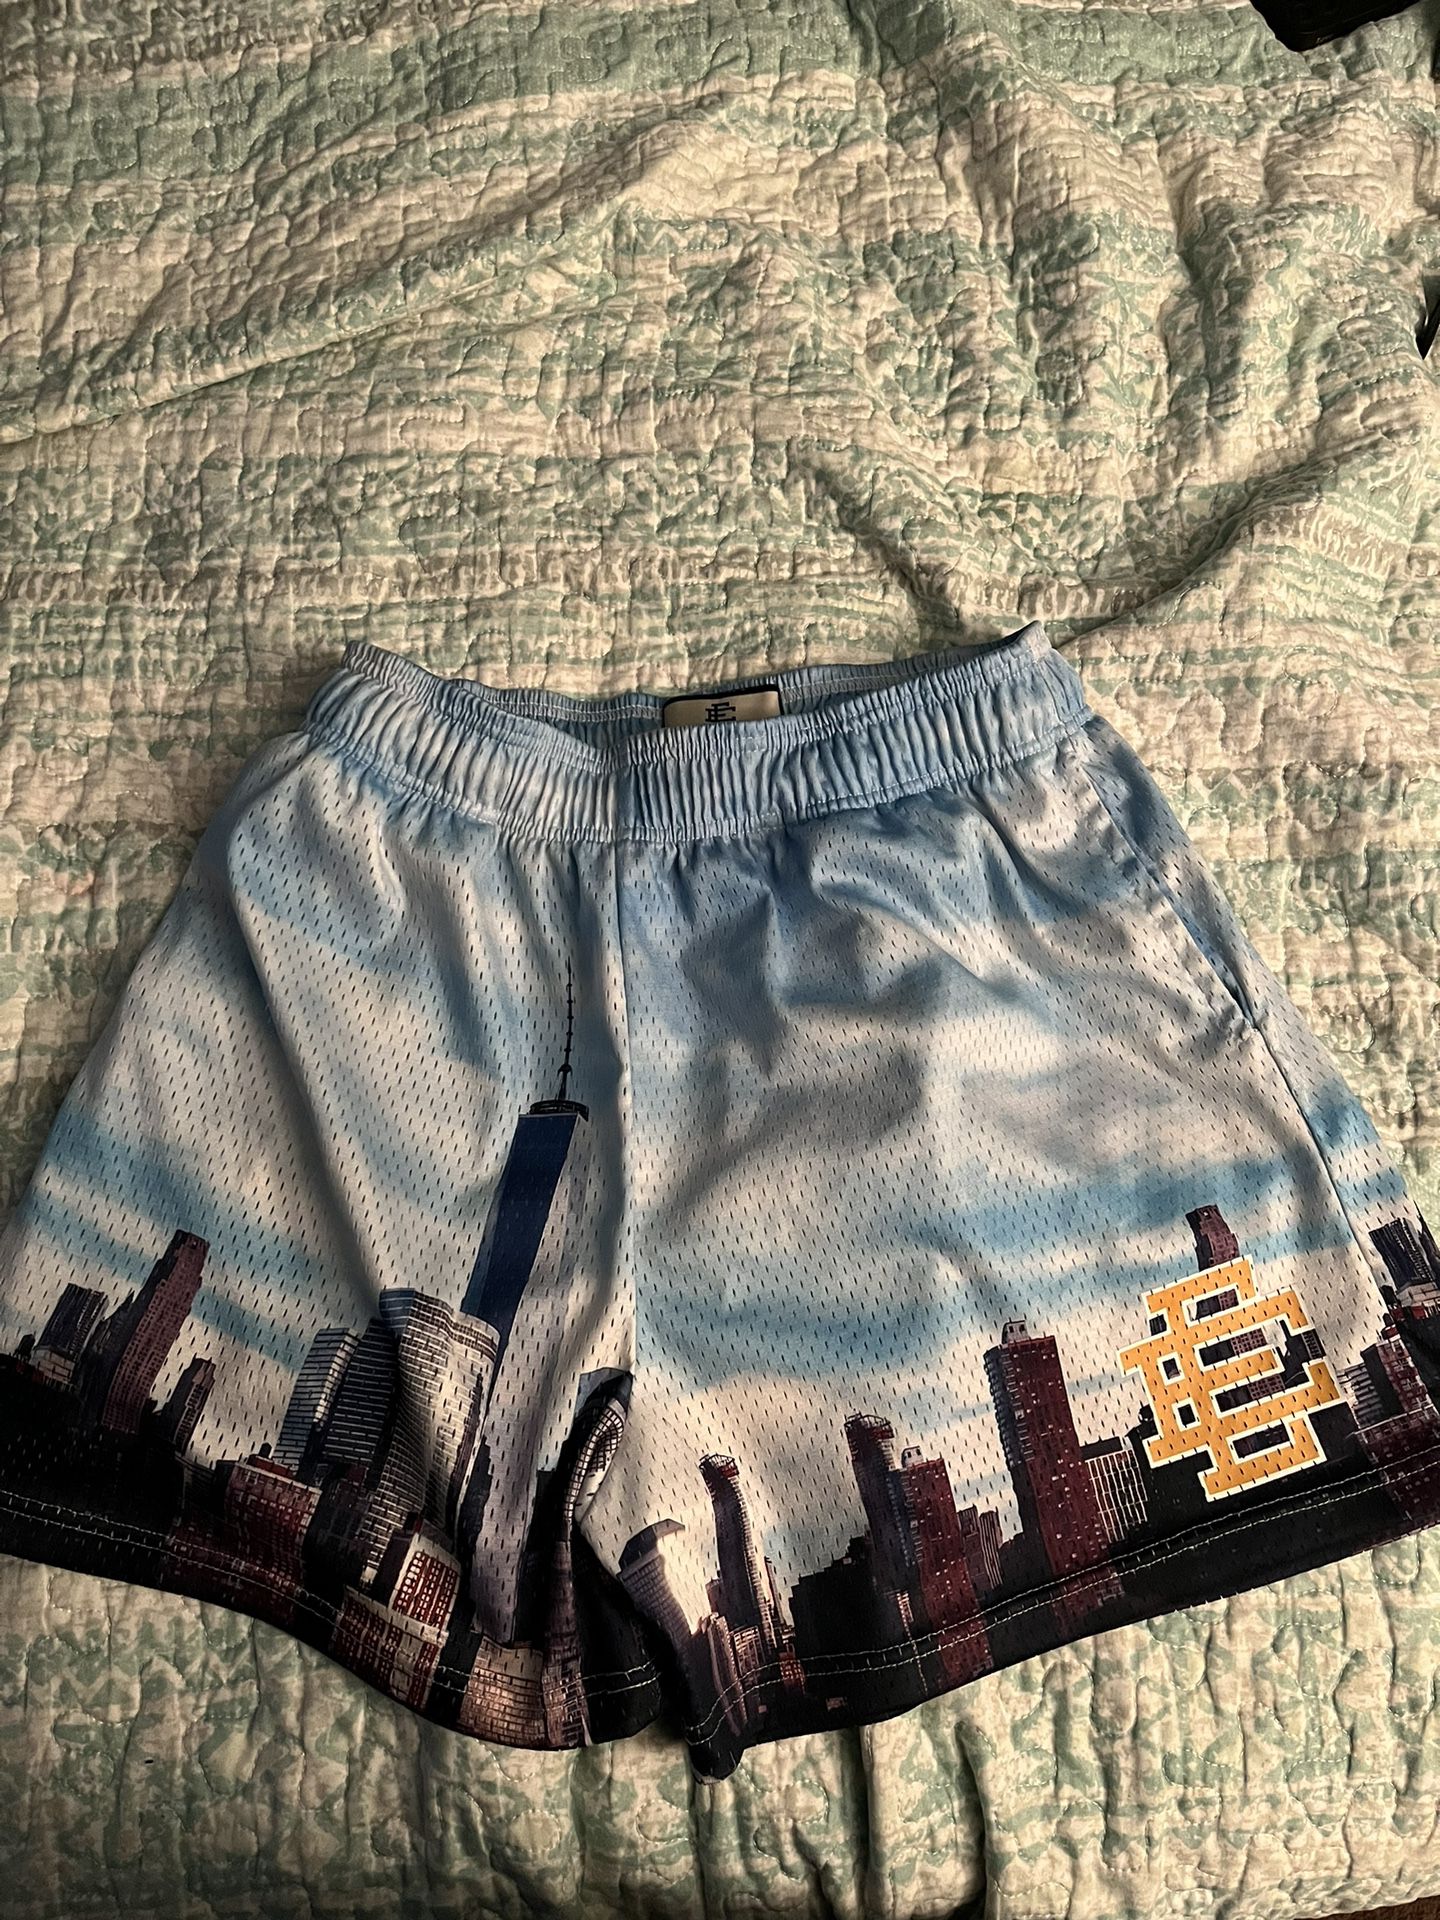 Men shorts lv for Sale in New York, NY - OfferUp